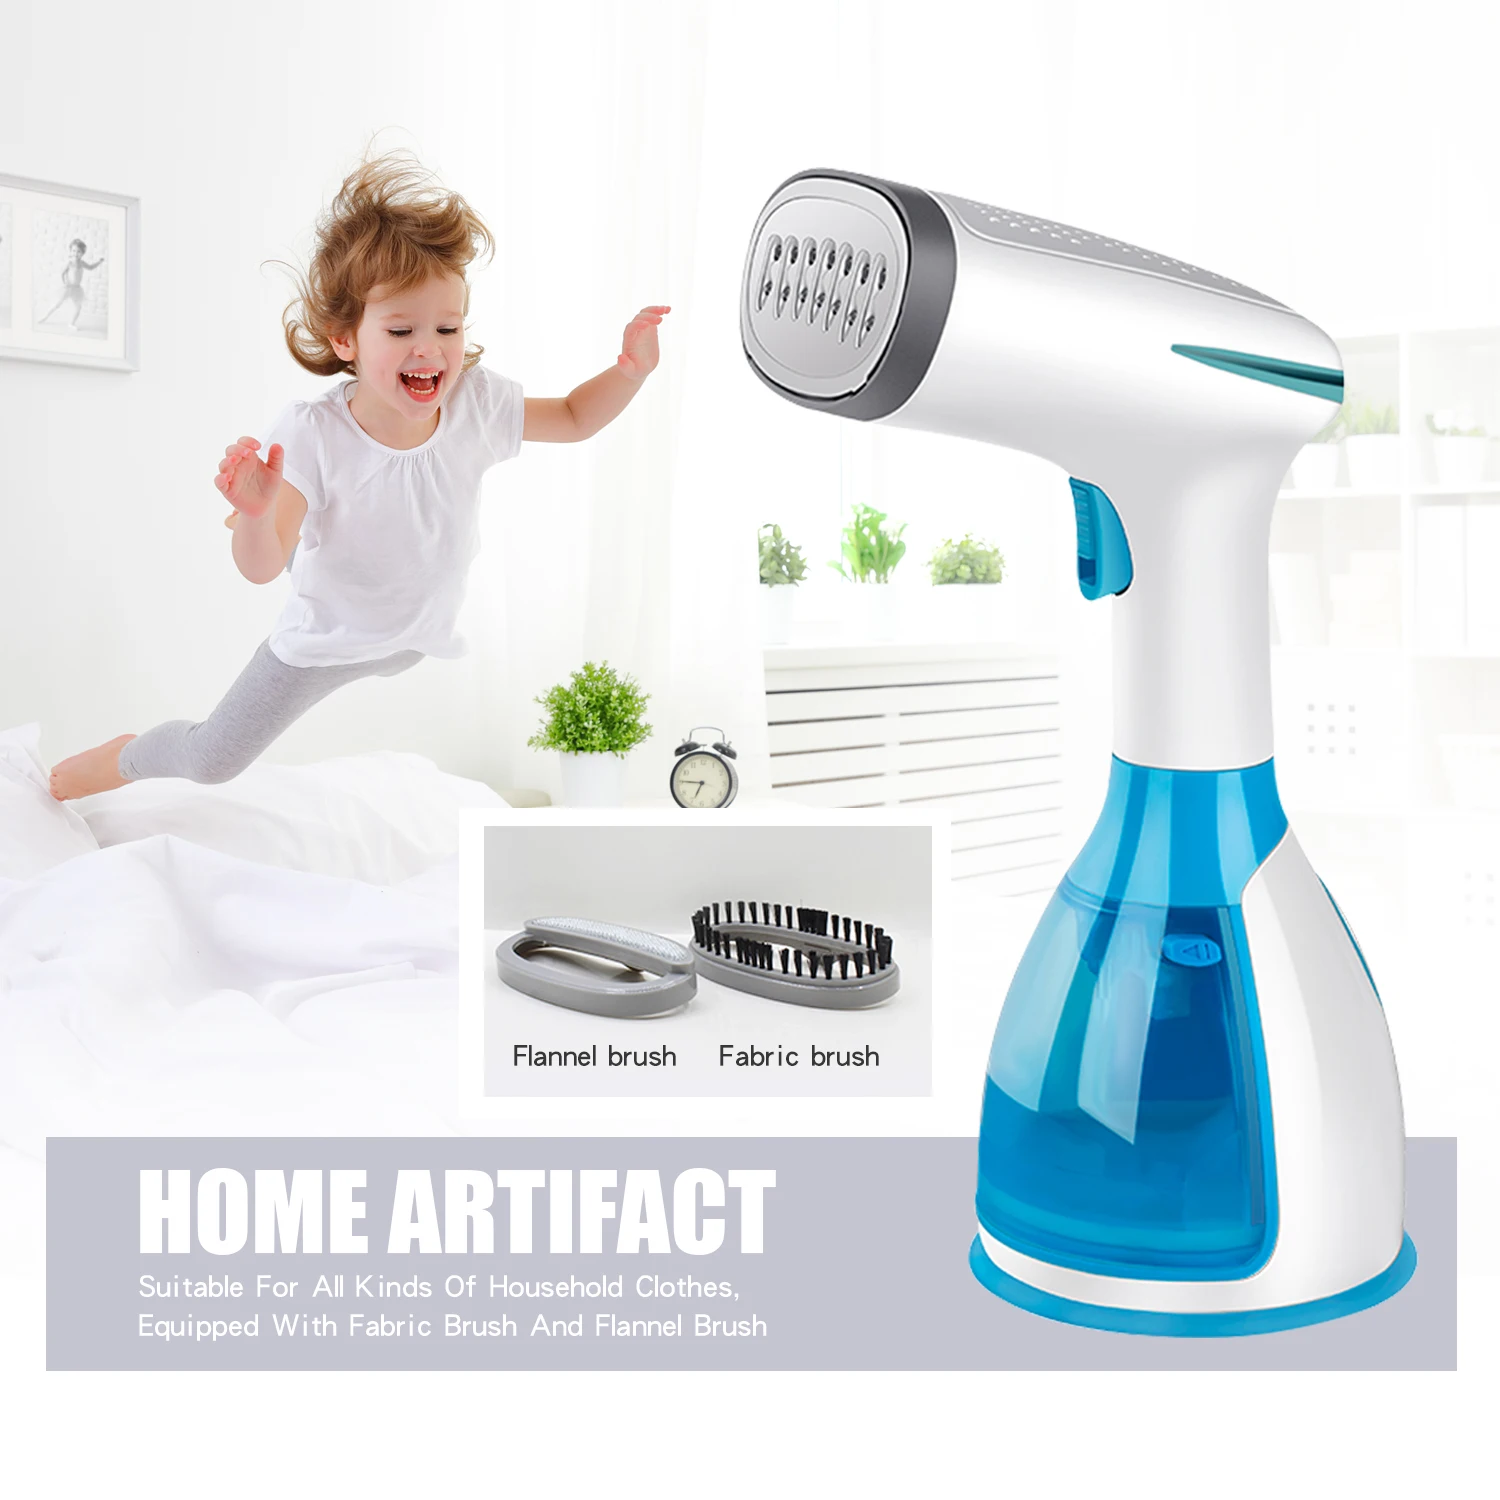 280ml Water Tank Garment Steamer 1500W Portable Handheld Portable Steamers For Clothes Auto Off Flyinghedwig Clothes Steamer Horizontal & Vertical Steam Fast Heat-up 